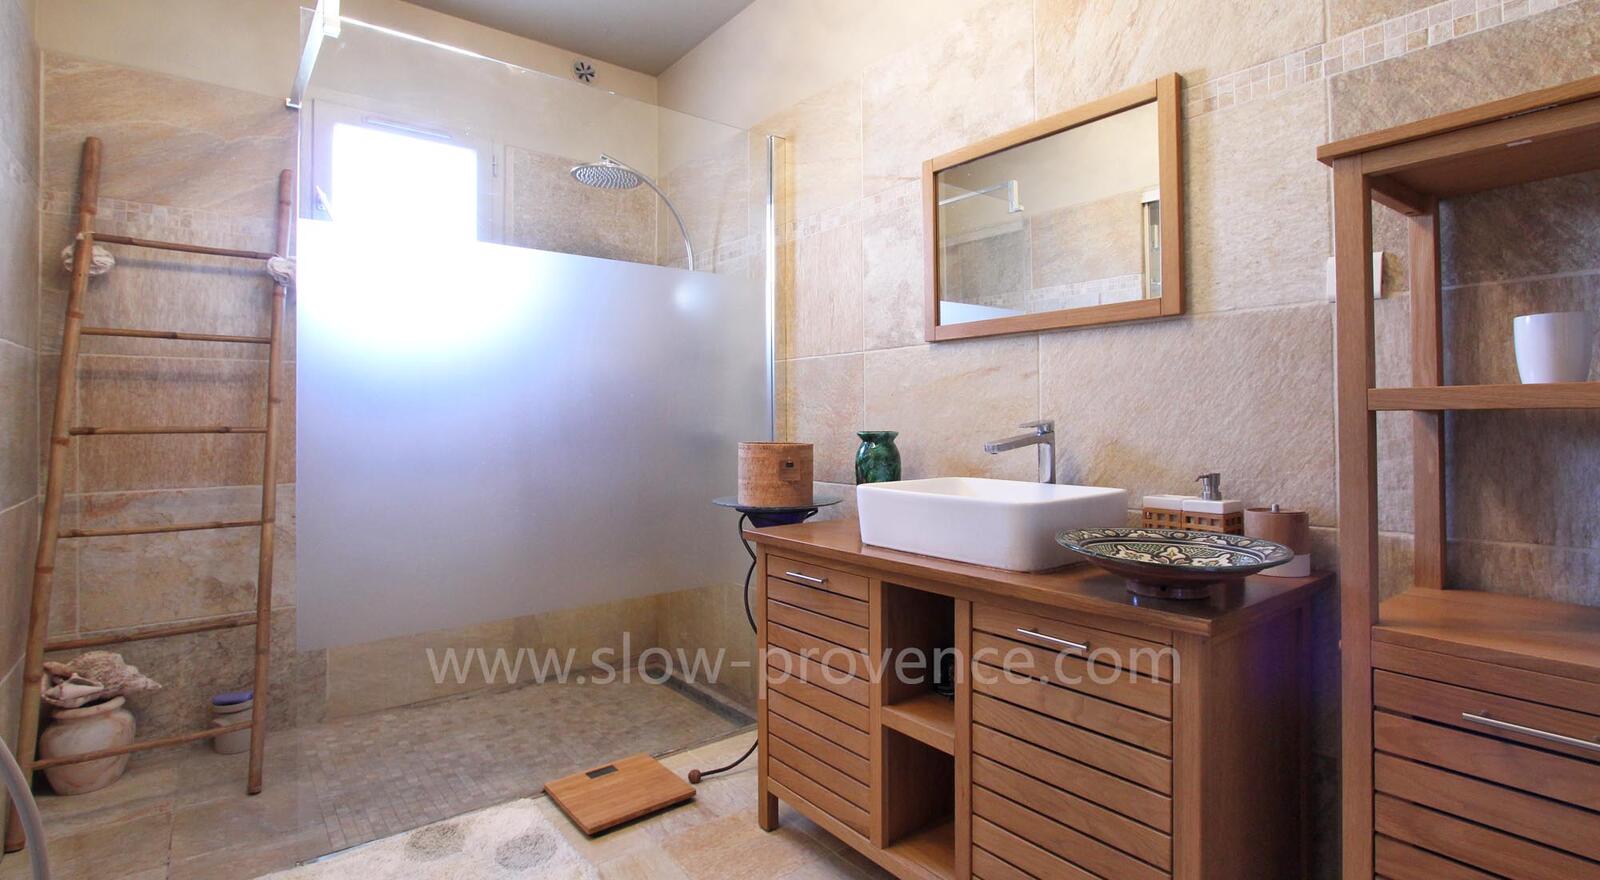 Bathroom shared by bedrooms 1 & 2